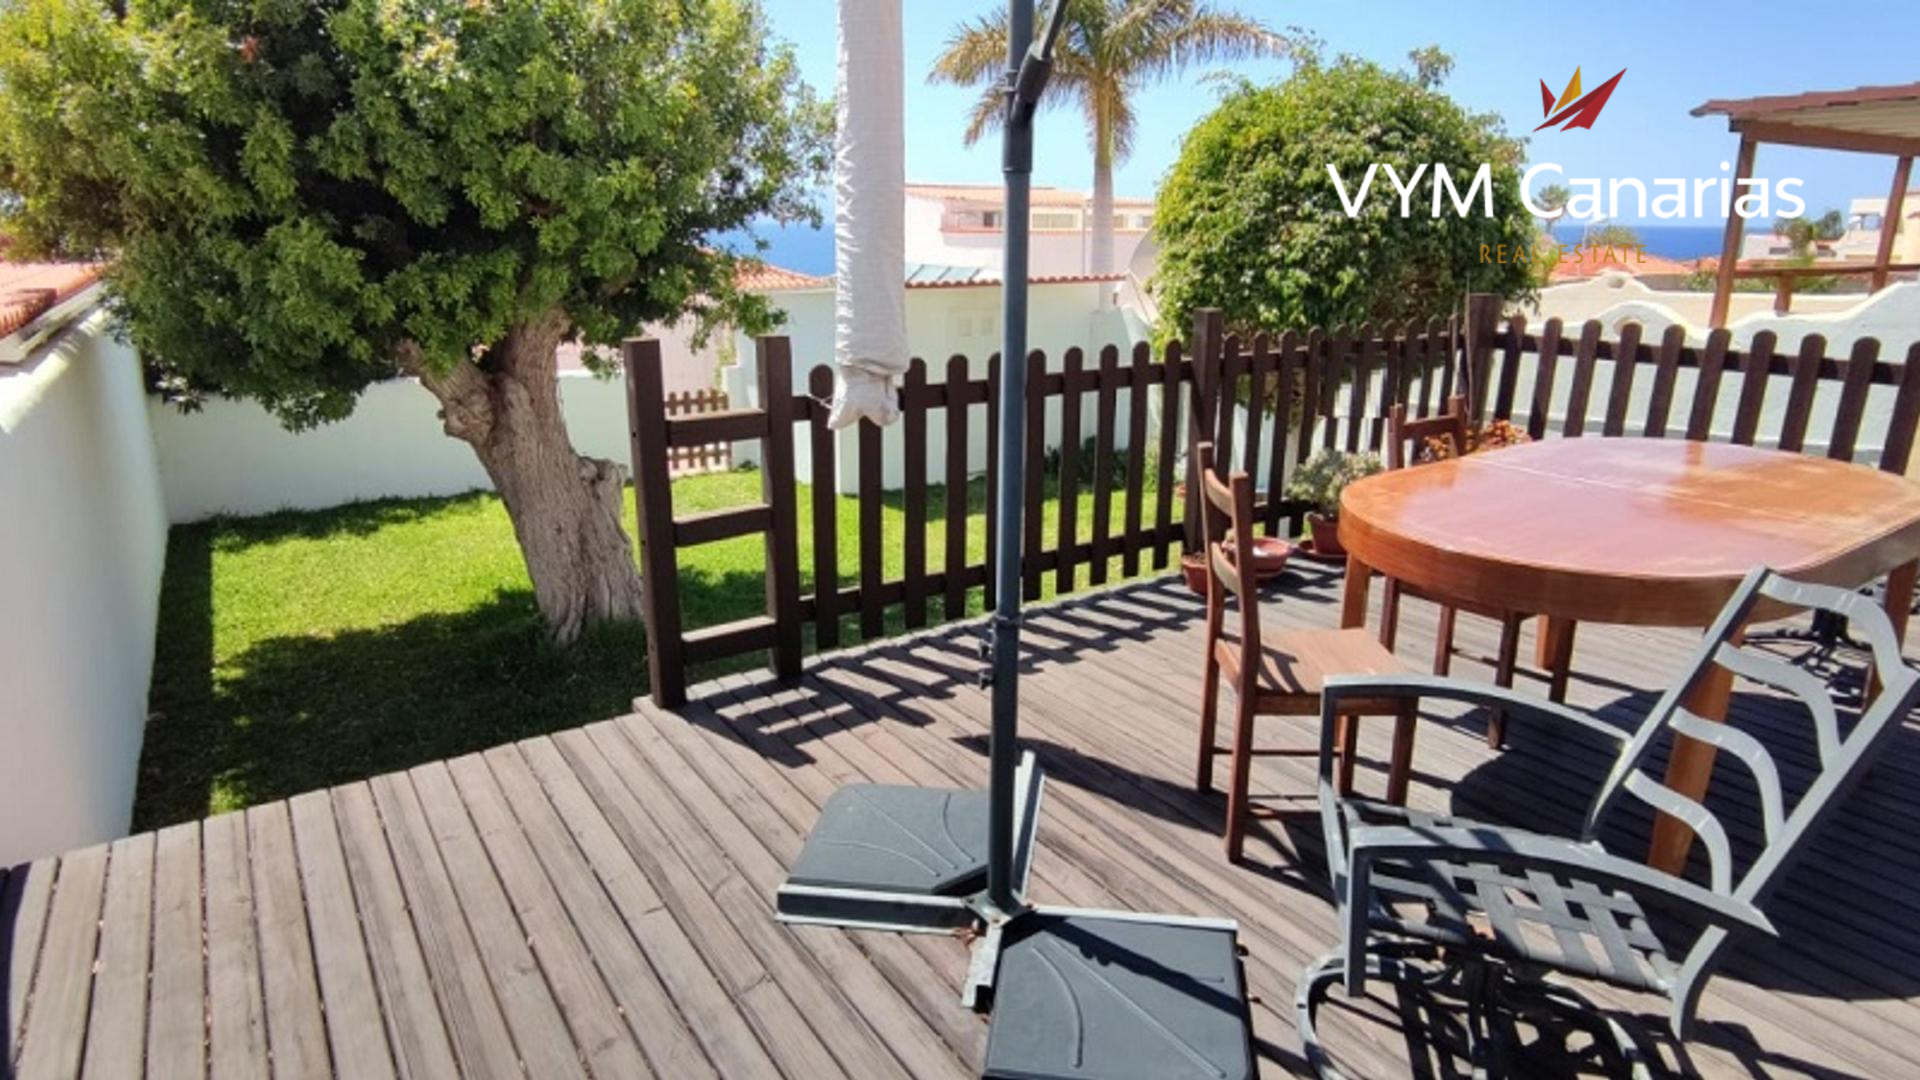 Apartment in Callao Salvaje marketed by Vym Canarias